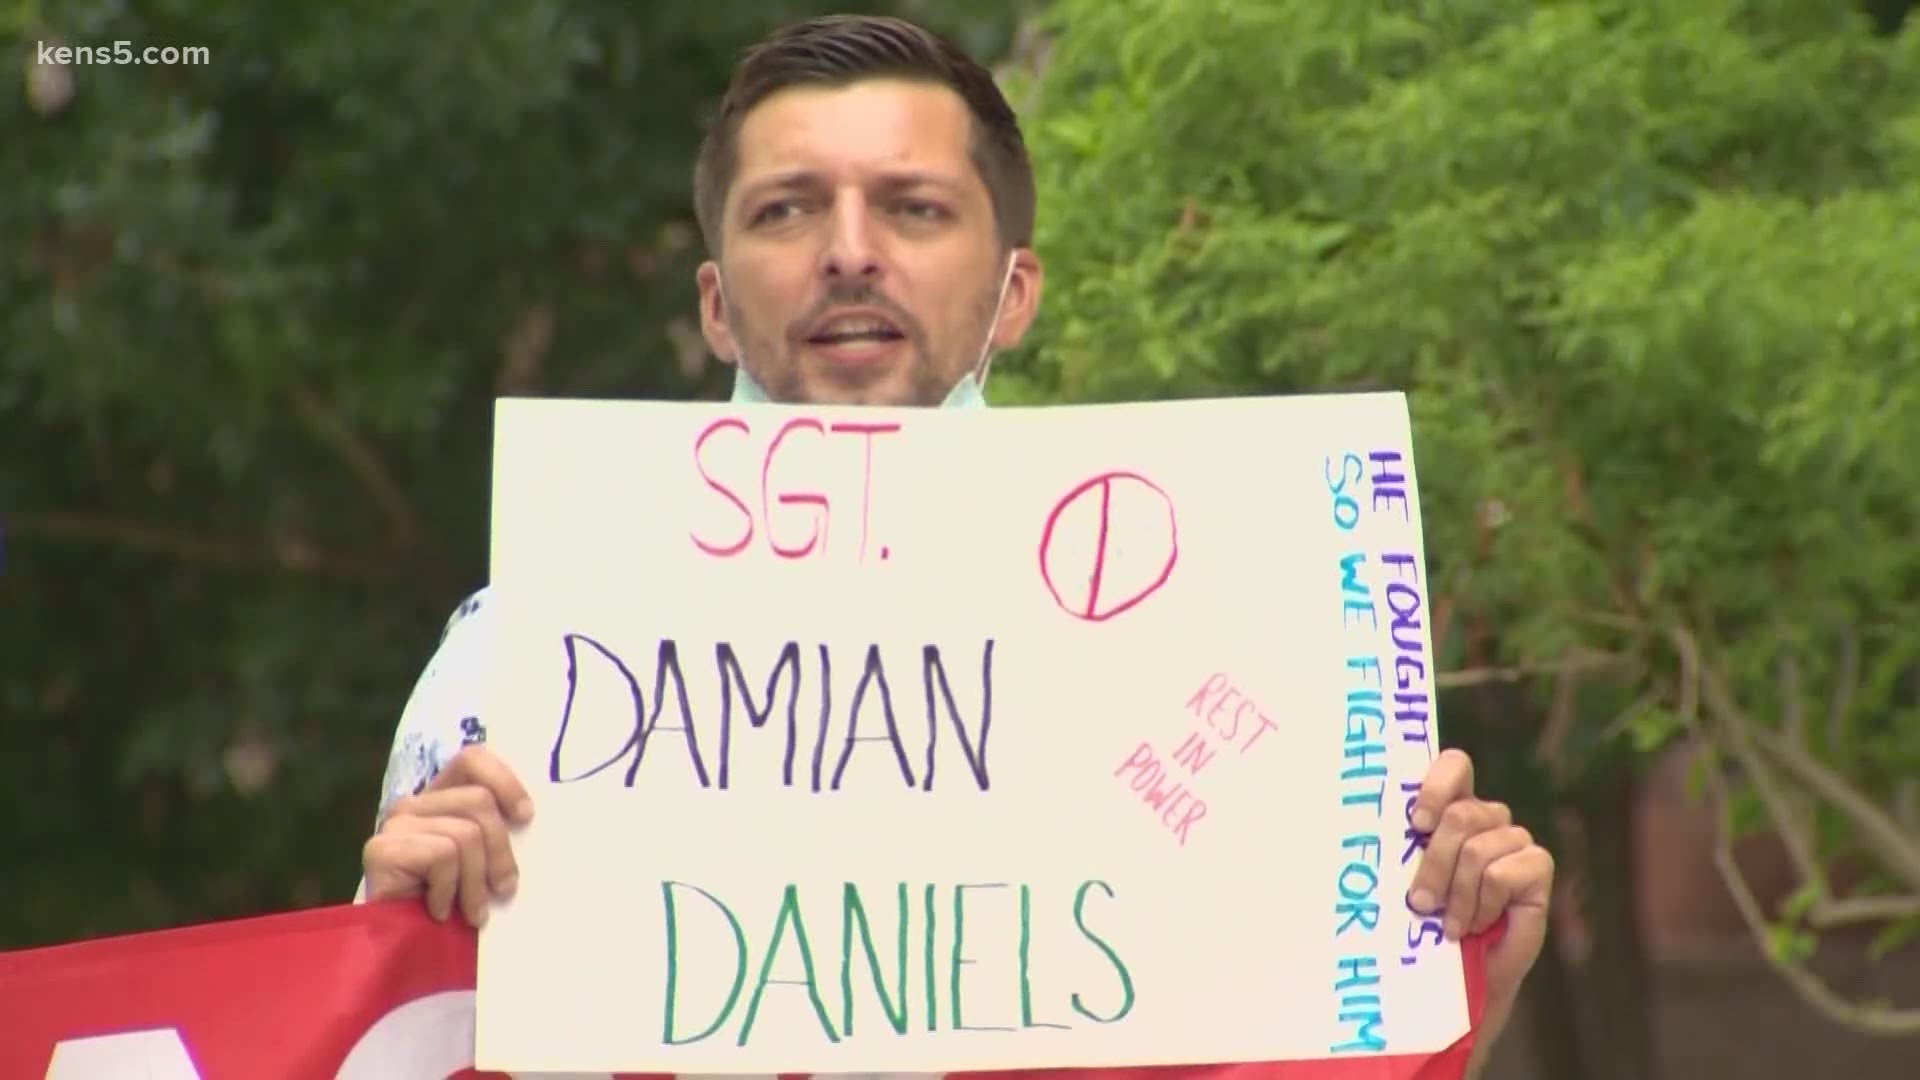 Damian Daniels was fatally shot by San Antonio-area deputies last week, ending a 30+ minute encounter that ended in a physical struggle.